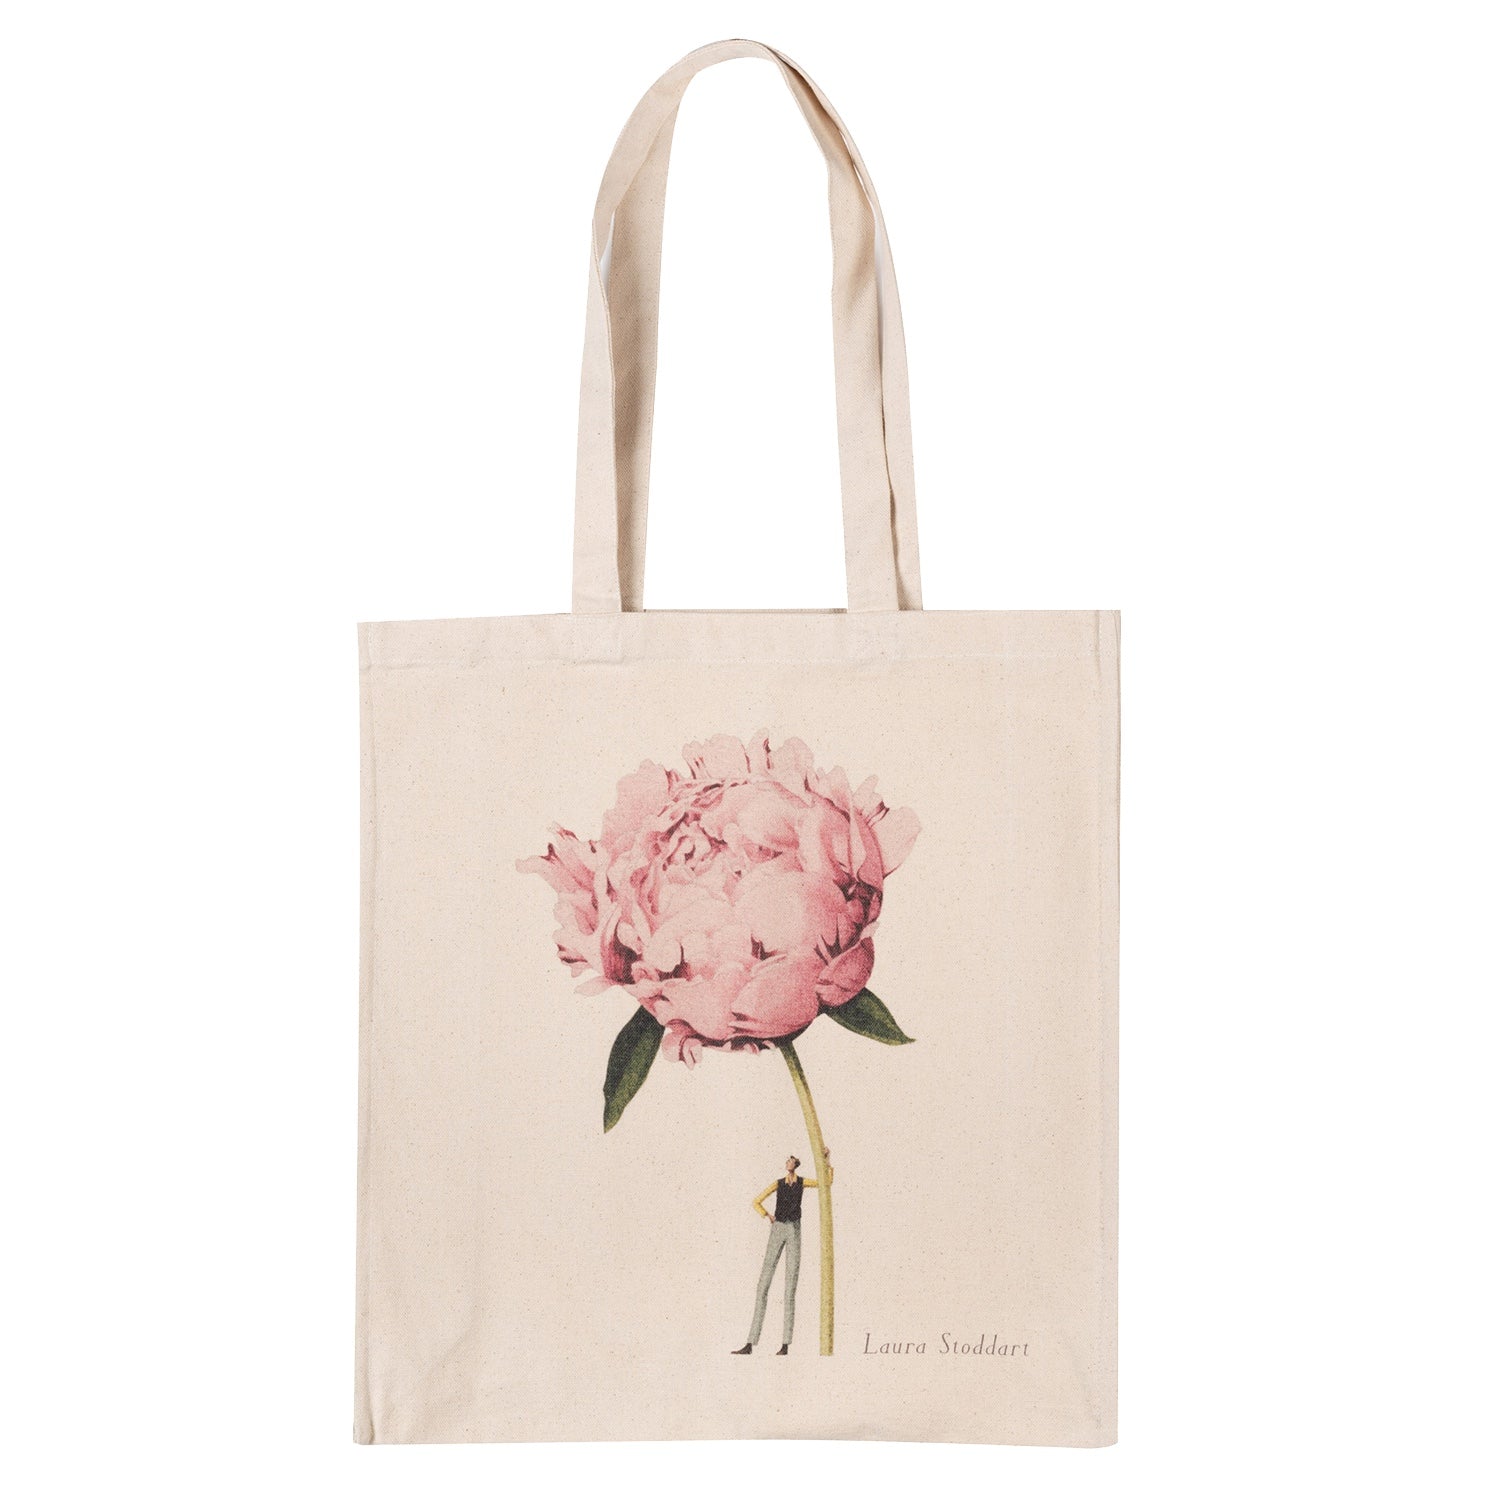 The Pink Peony Heavyweight Canvas Tote Bag is light tan featuring a stylized illustration of a woman holding a gigantic light pink peony bloom by the stem.